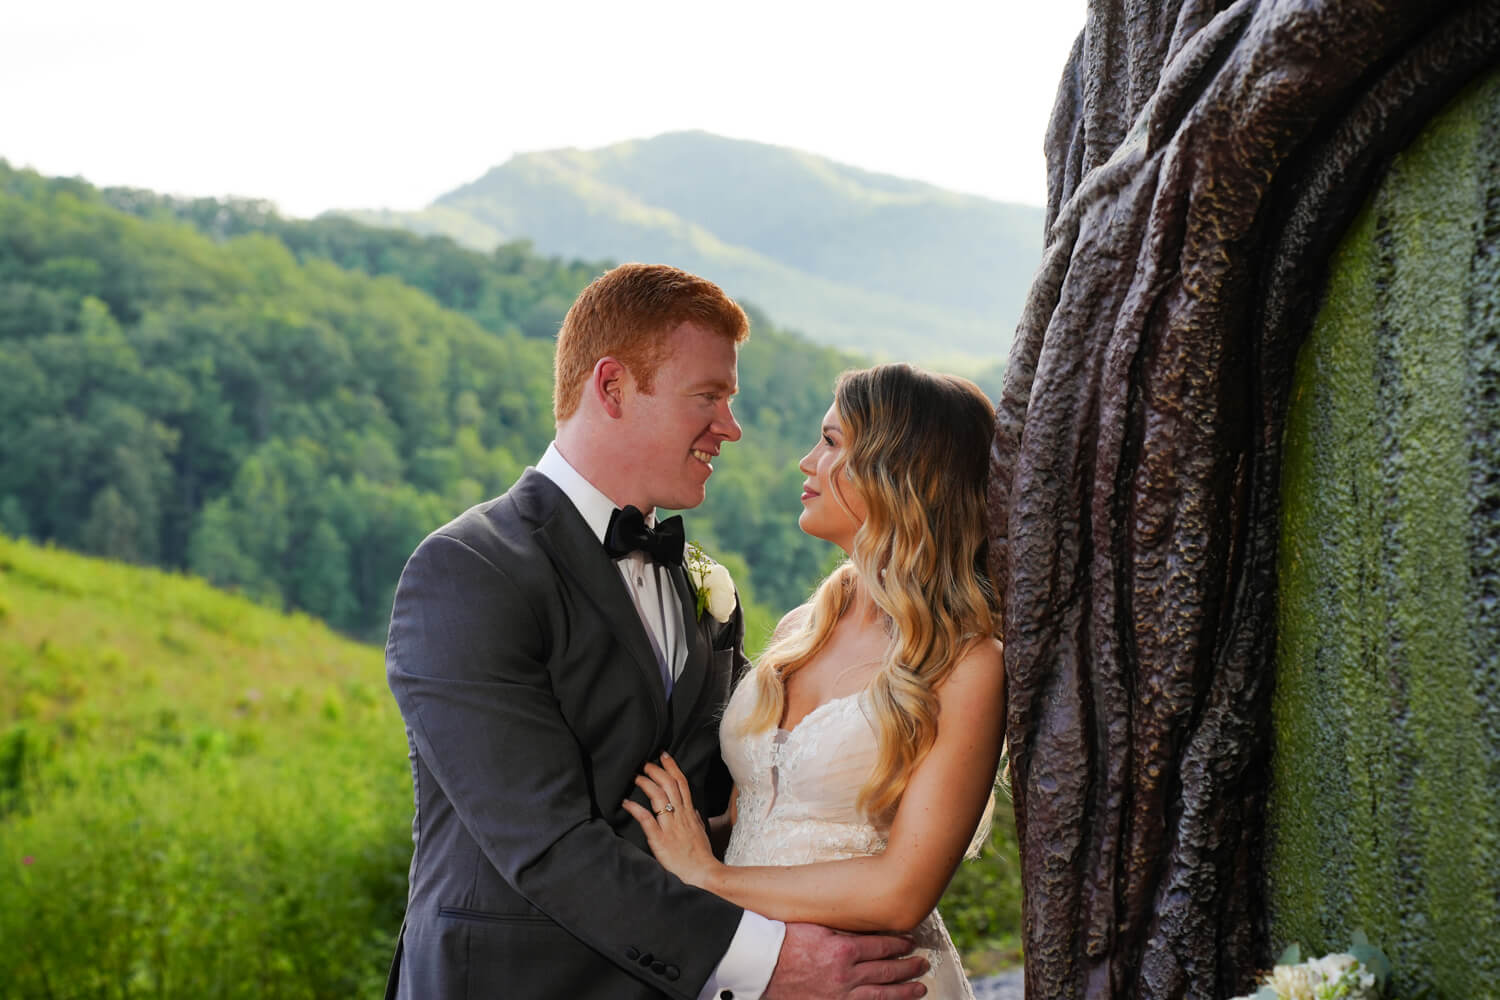 Wedding couple gazing into each other's eyes in front of a mountain view as the bride leans against a green door with log trim